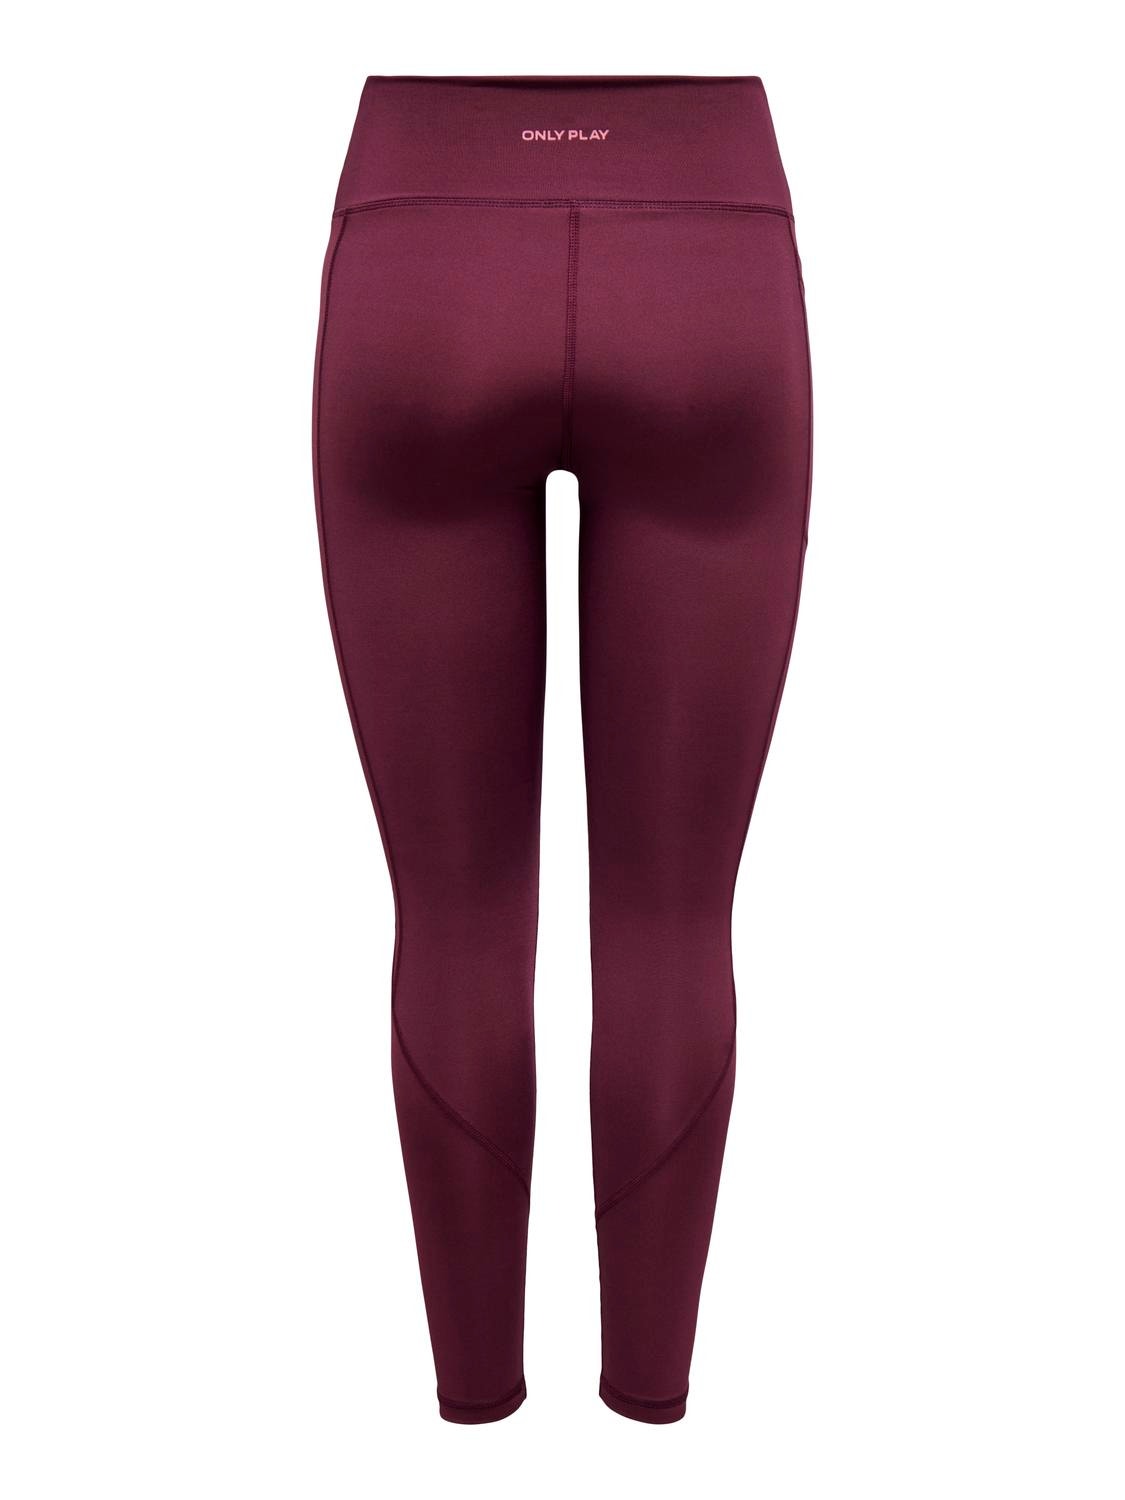 ONLY Tight Fit High waist Leggings -Windsor Wine - 15295214